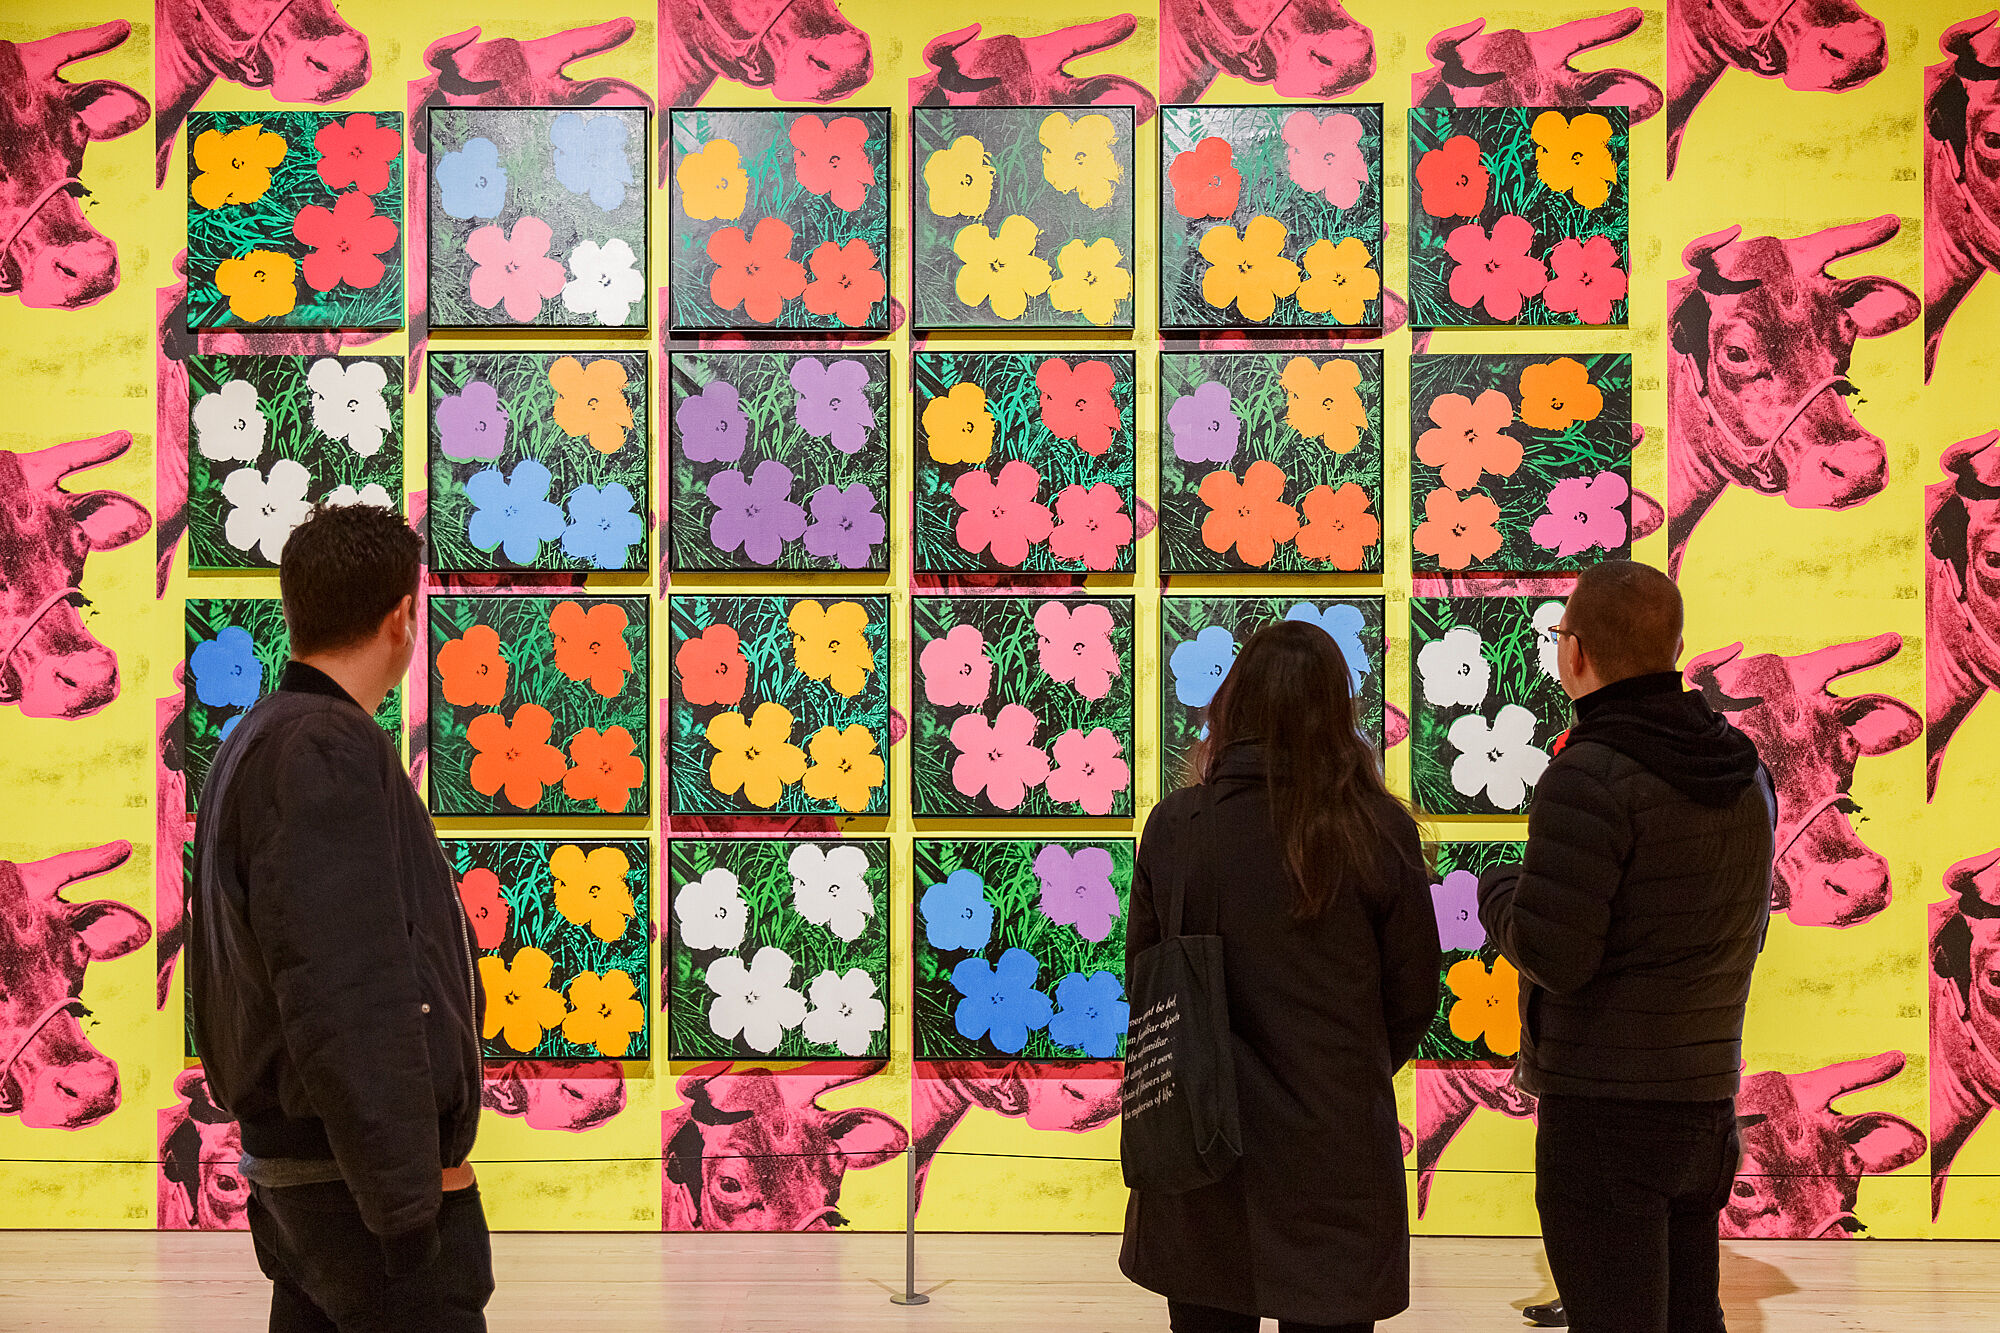 A photograph of 3 visitors, with their backs turned to camera, looking up at a large Warhol work.